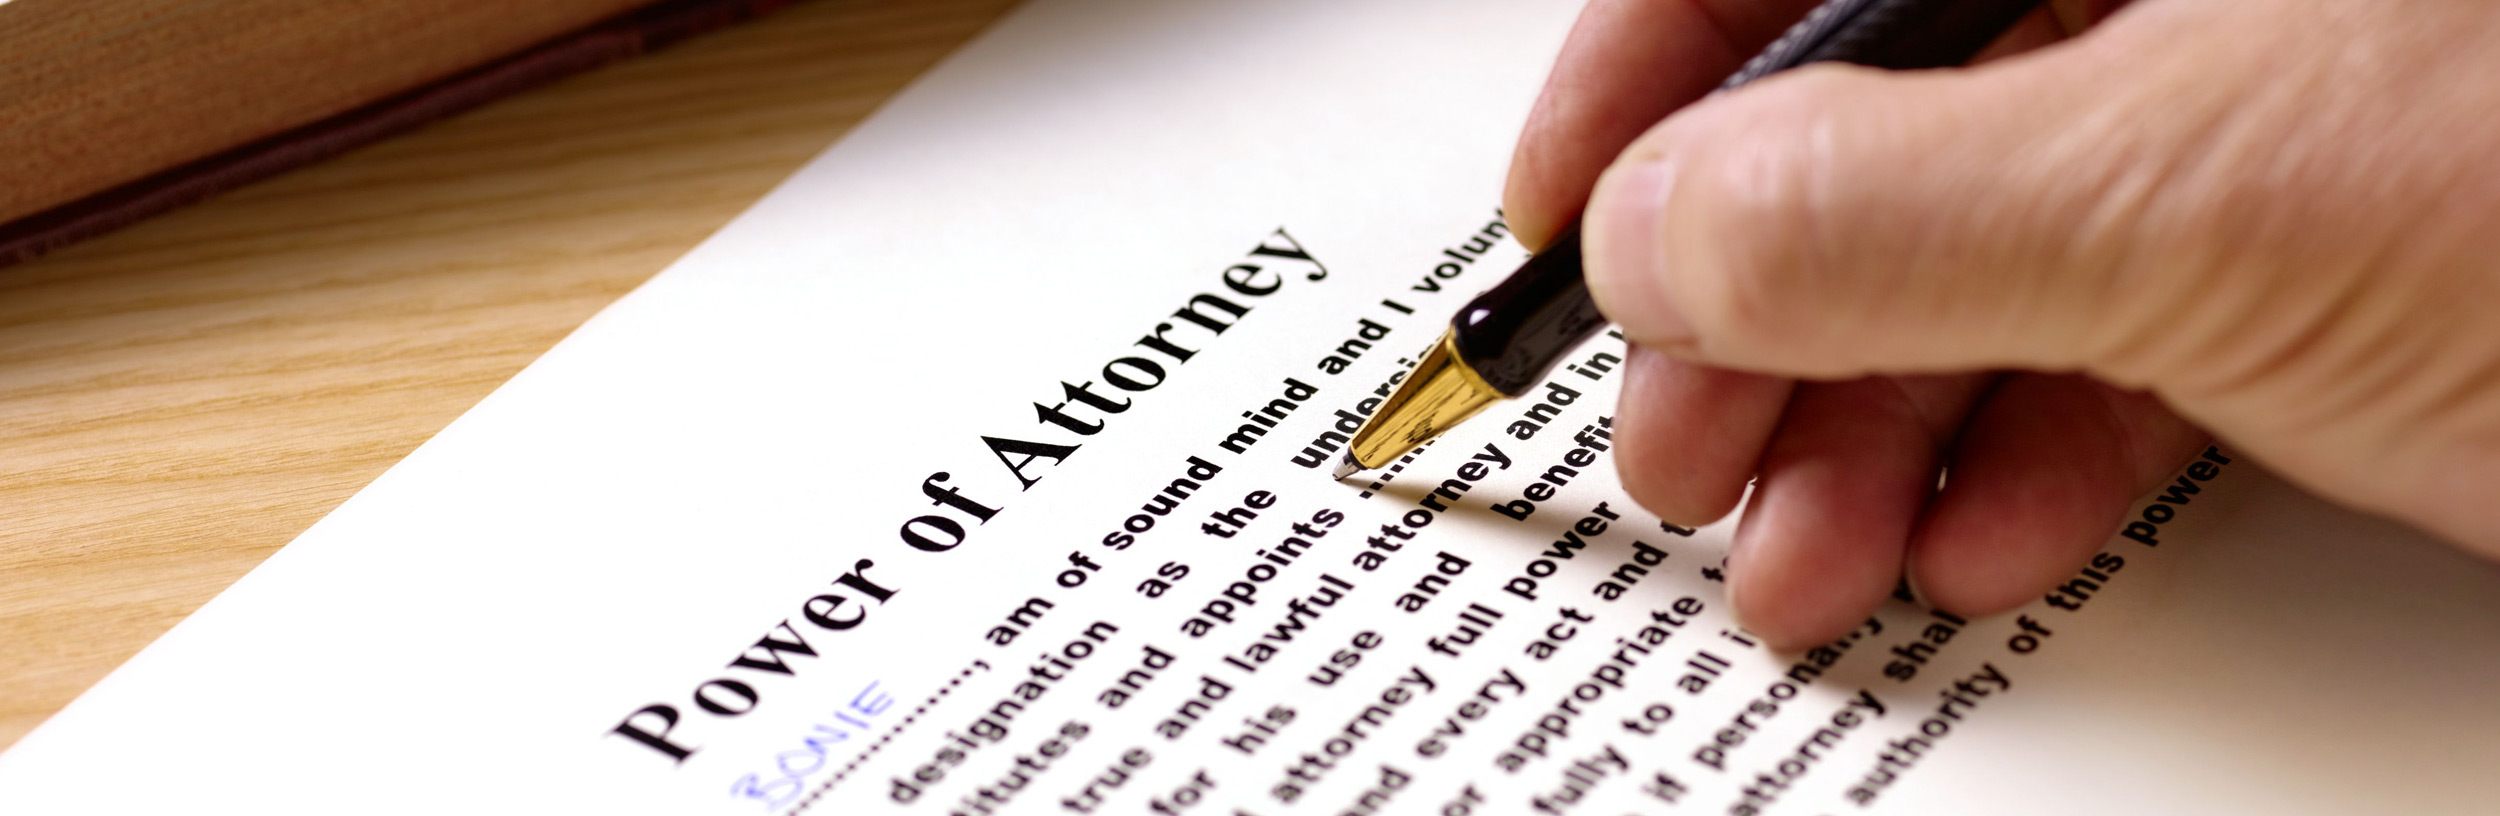 Post Power of attorney